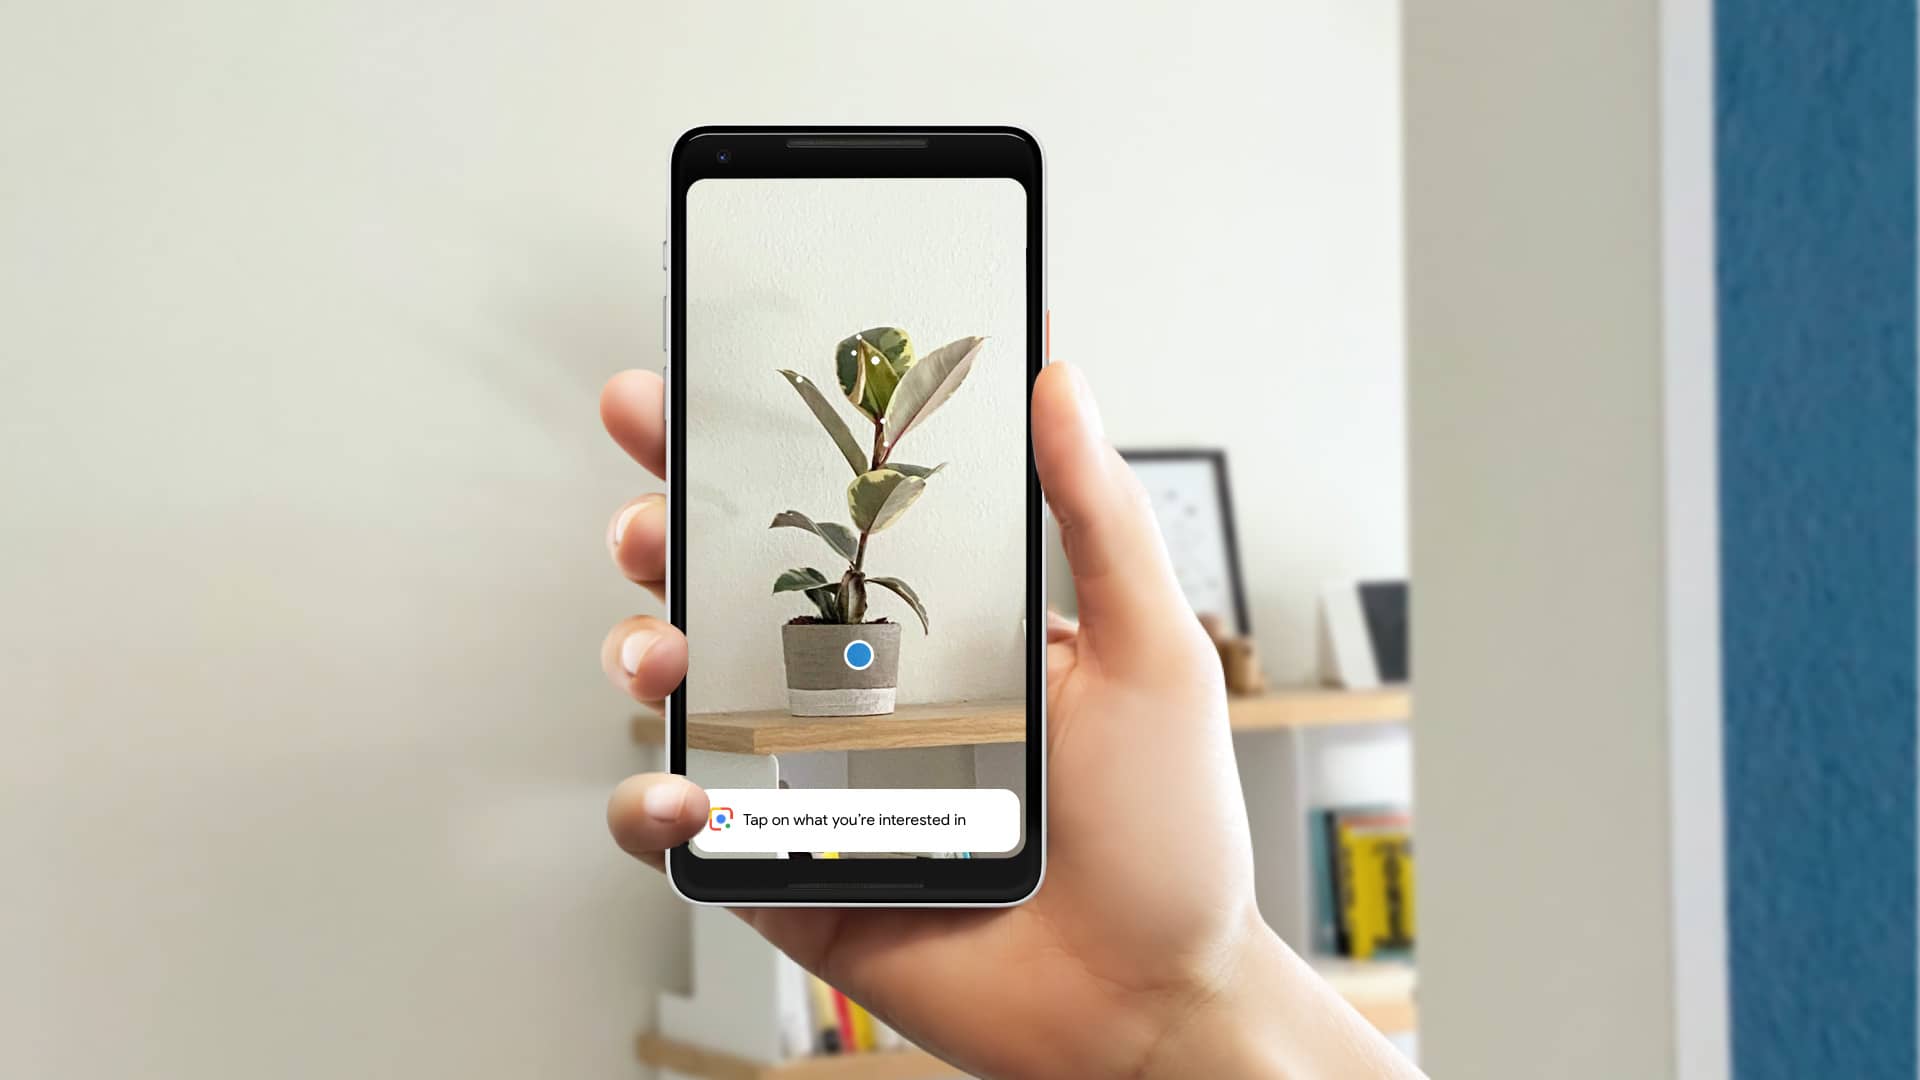 Could Visual Search Become AR’s Killer App?